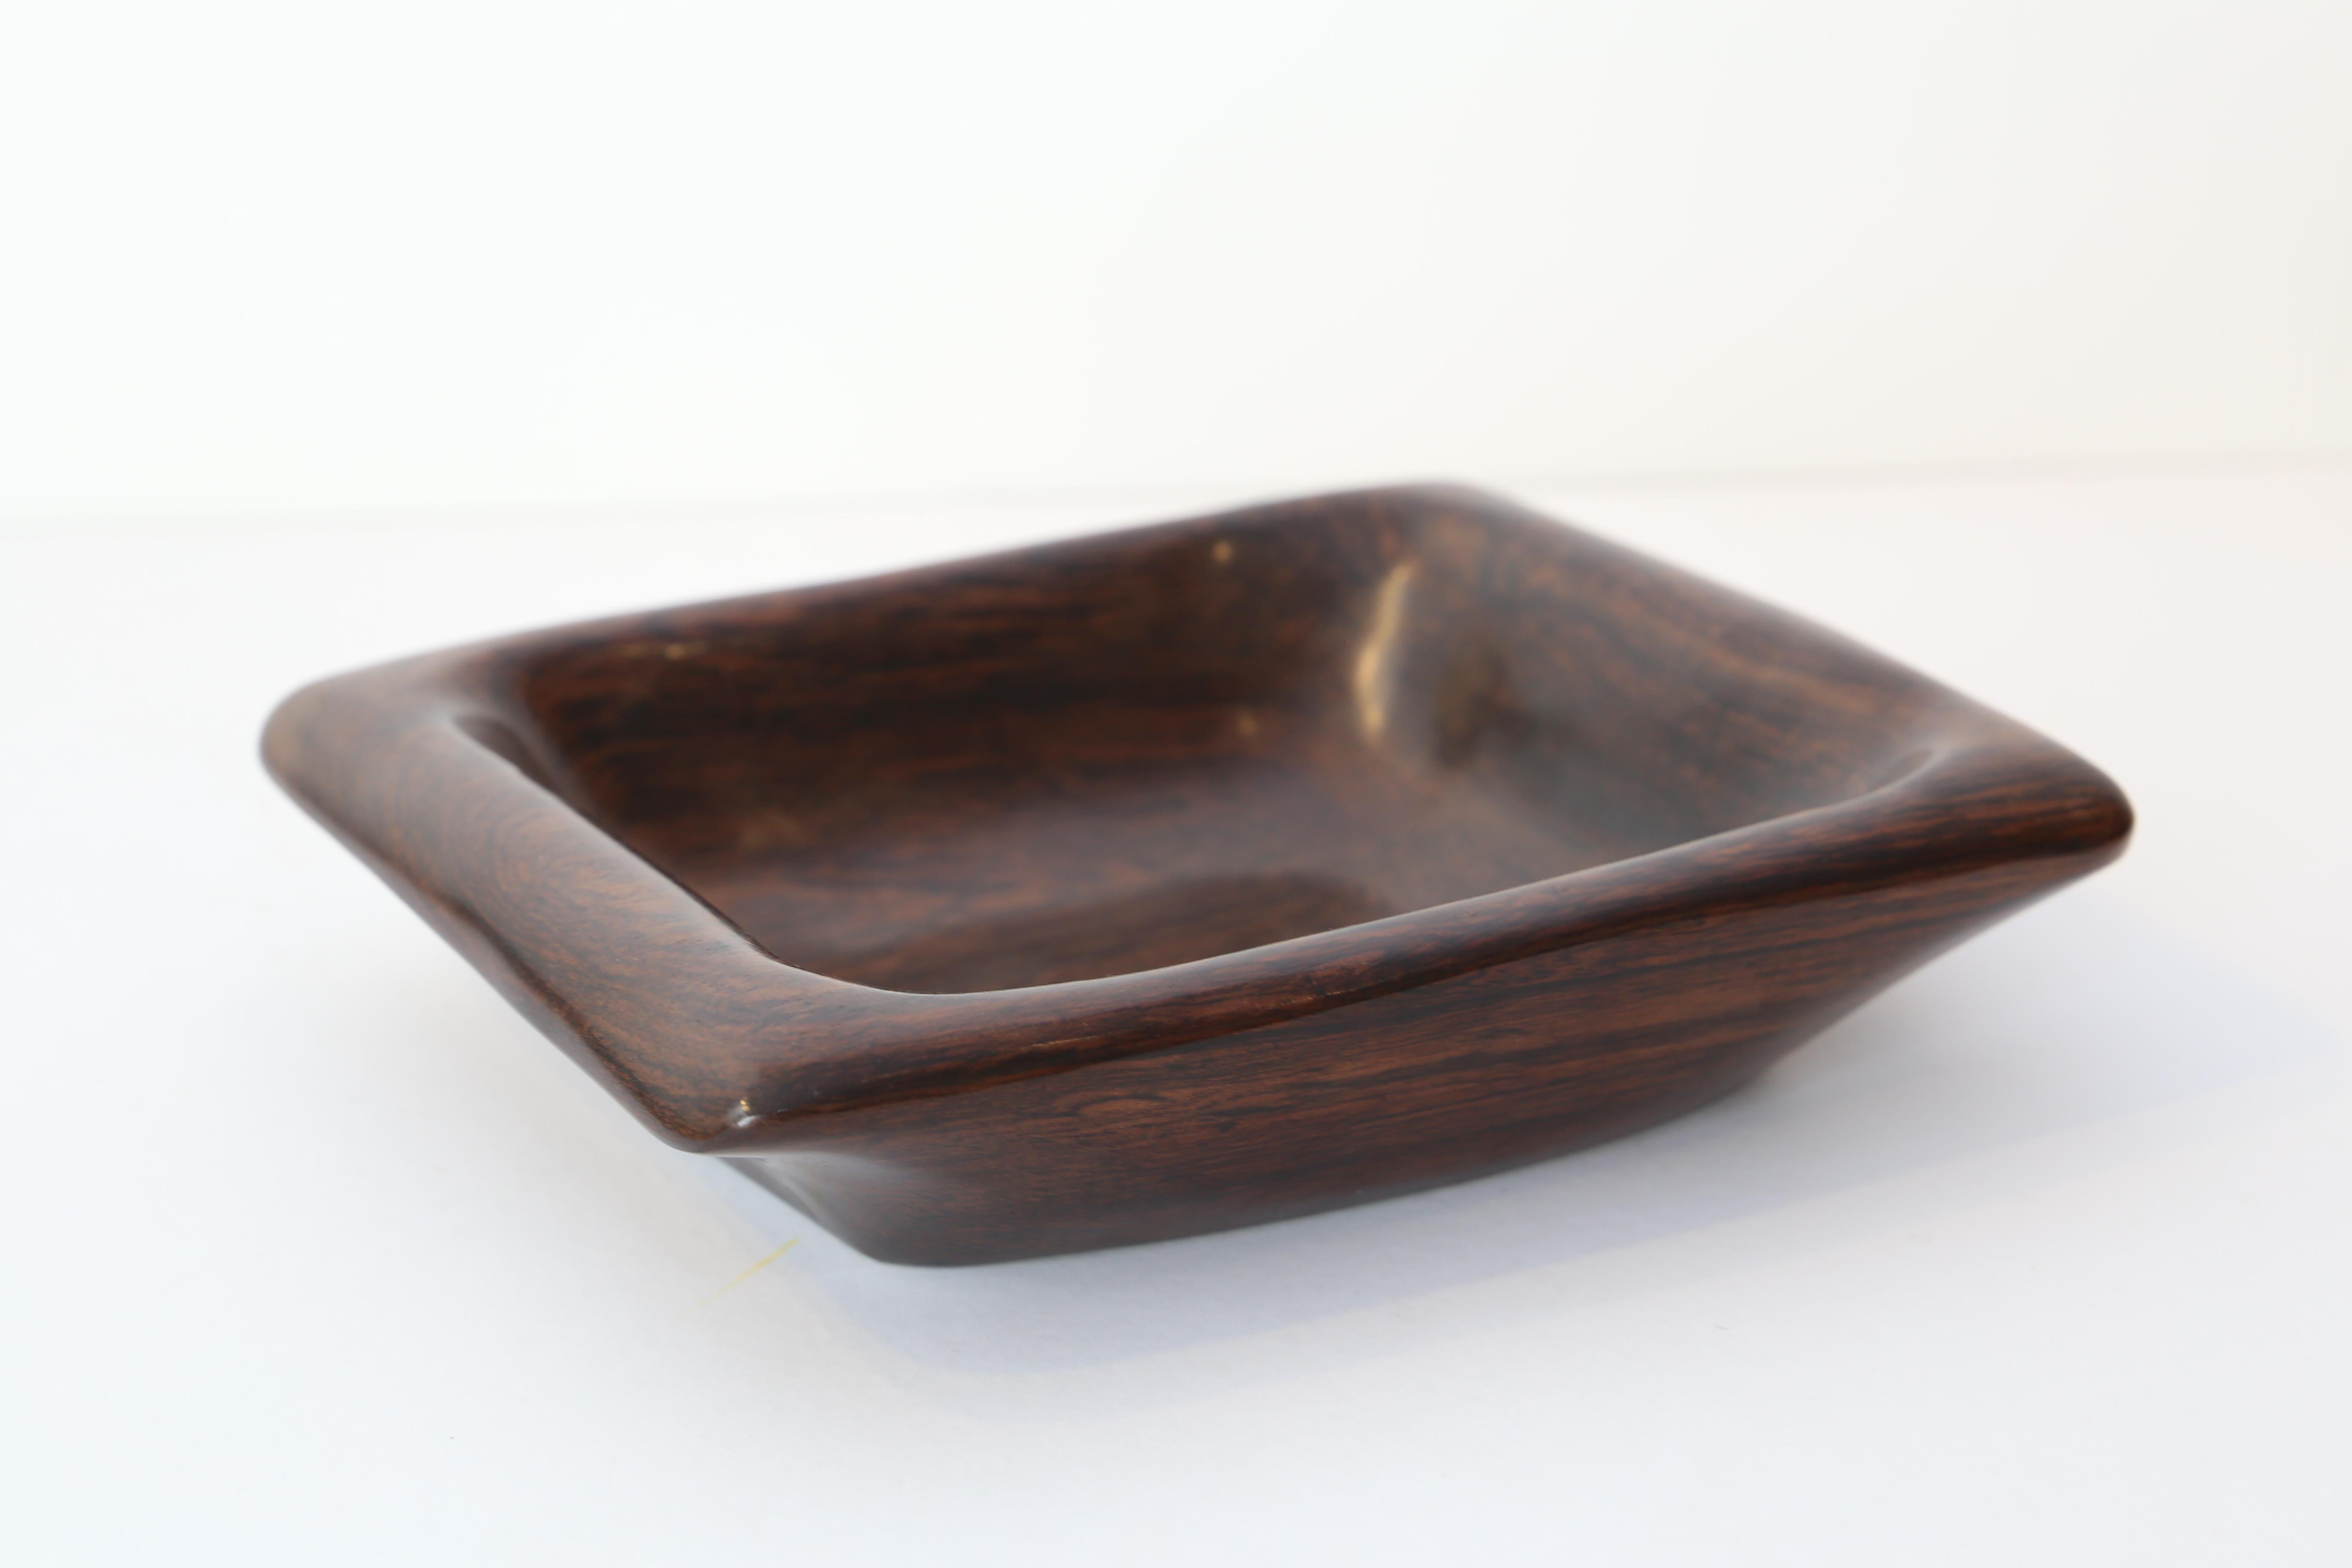 Odile Noll's 'coupe vide-poches' 
1960
Rosewood
6 x 30 x 22 cm
Signed 'ONoll' under the base.